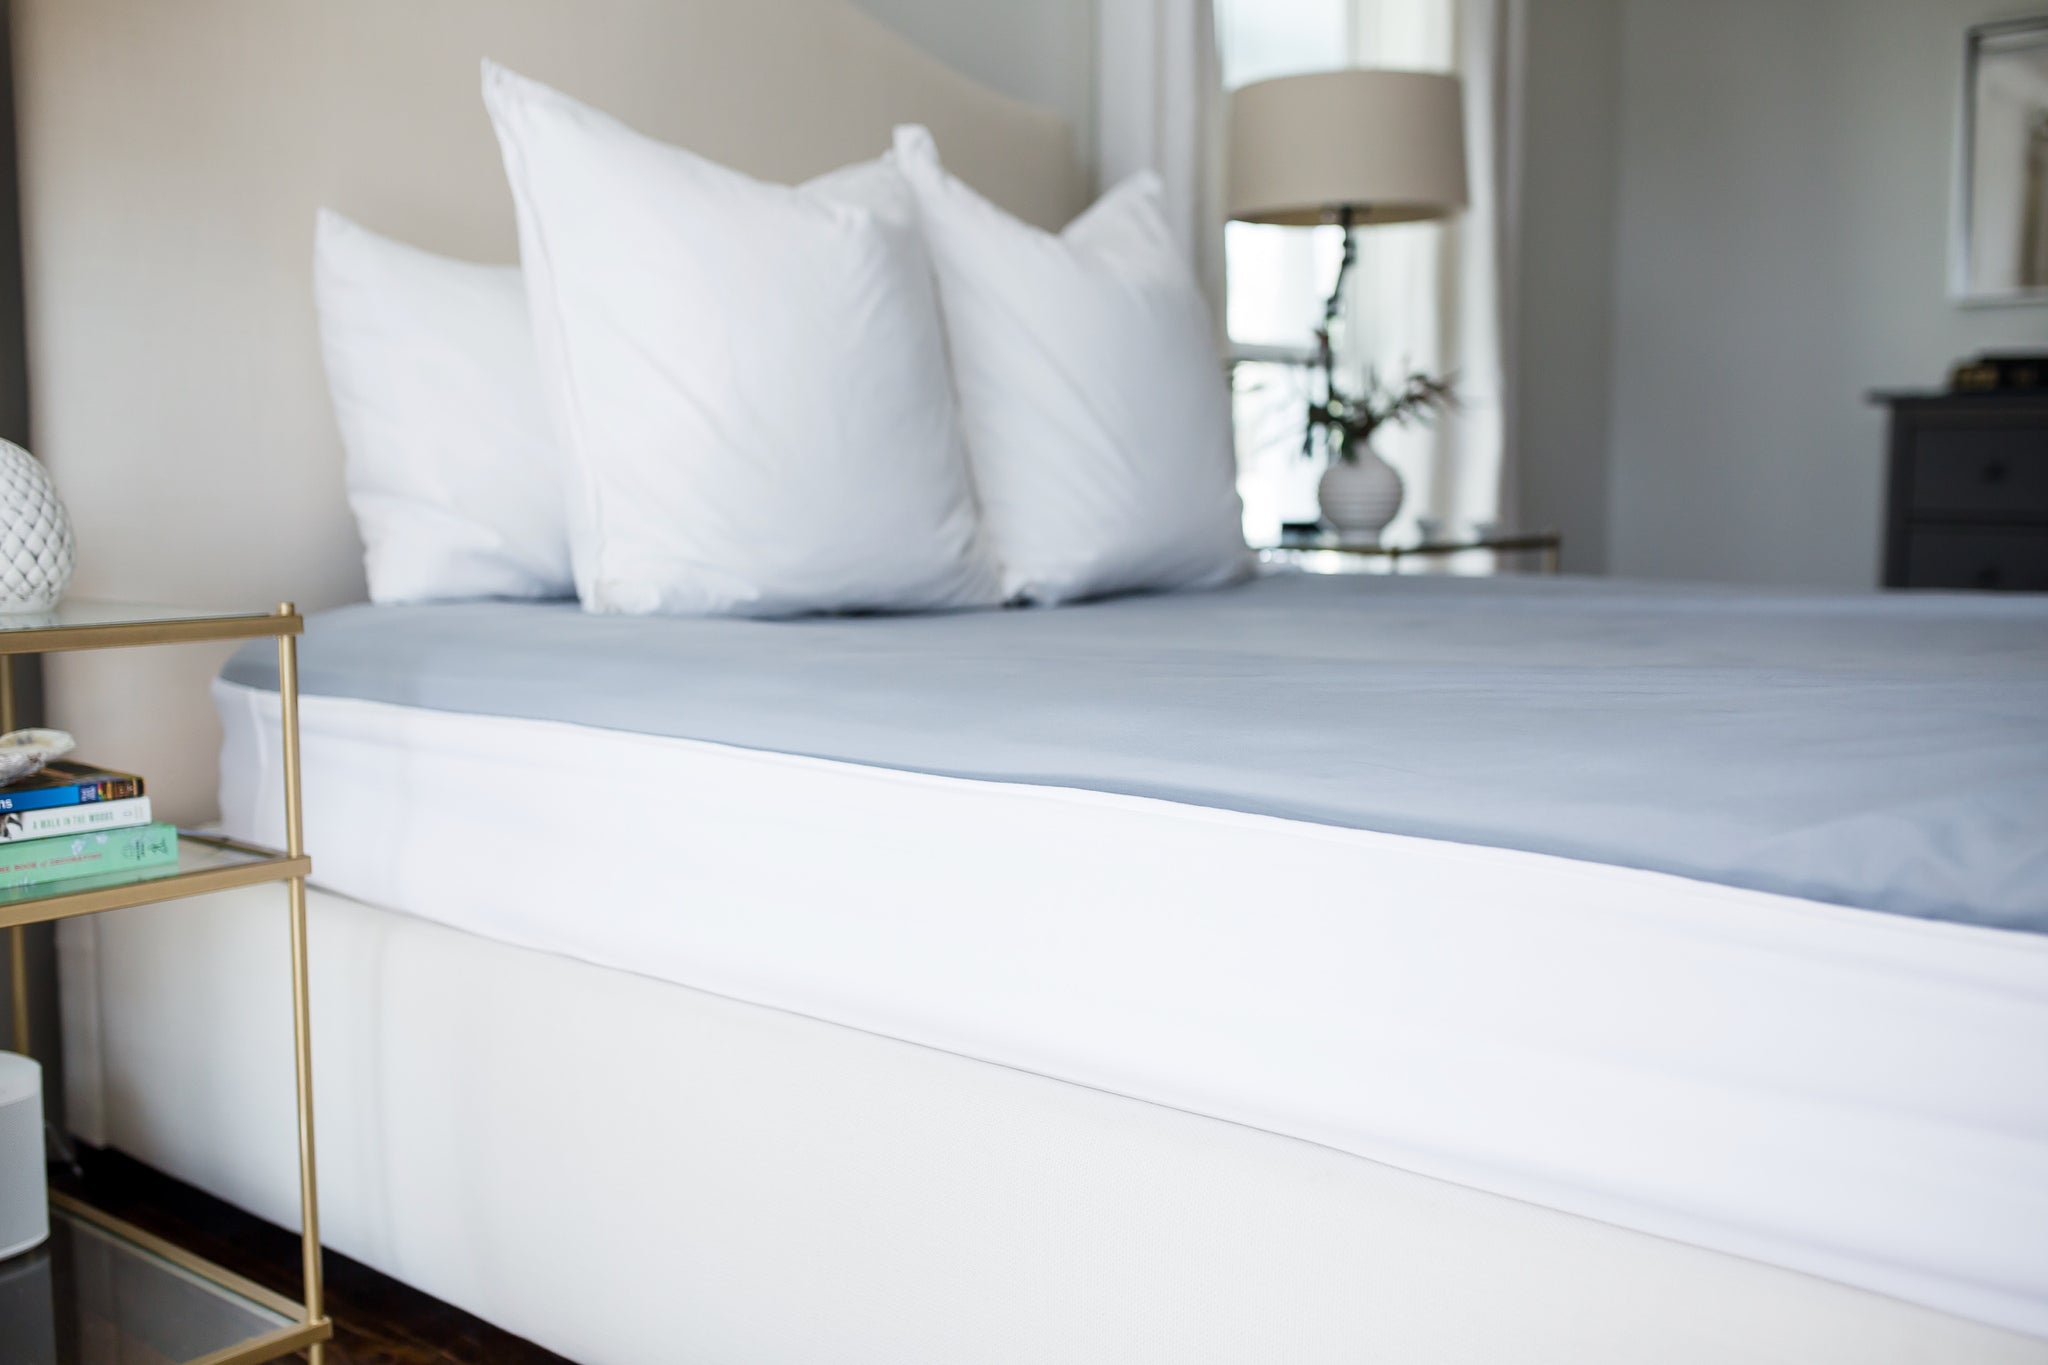 Putting the Better Bedder® on your mattress. No more tucking